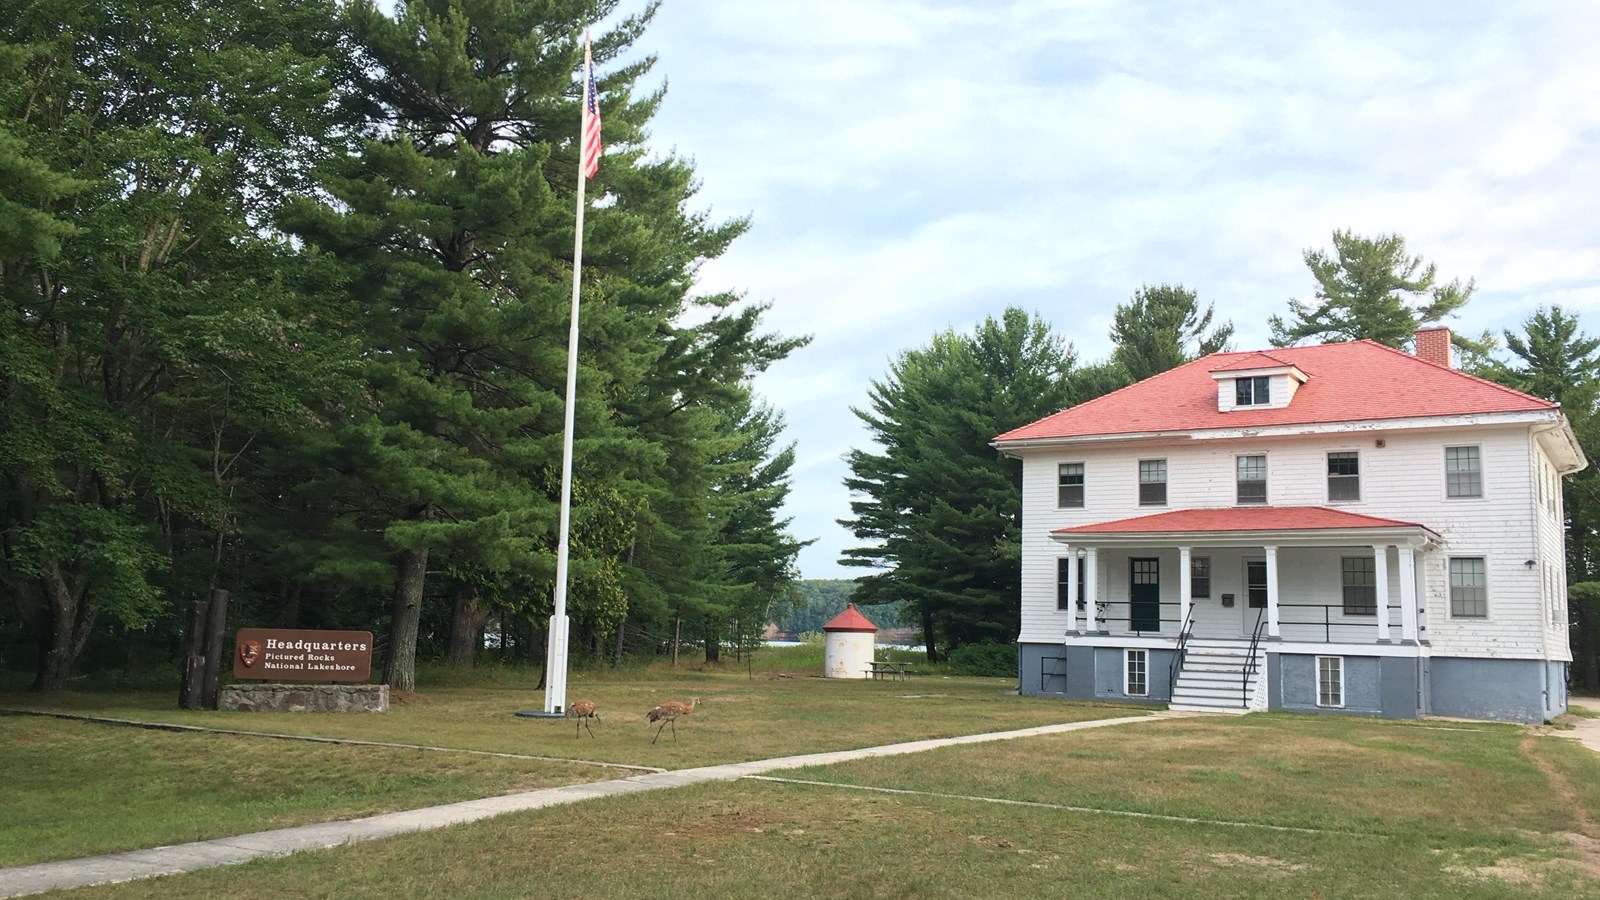 Munising U.S. Coast Guard Station at Sand Point on a summer day. Two sandhill cranes wander the lawn